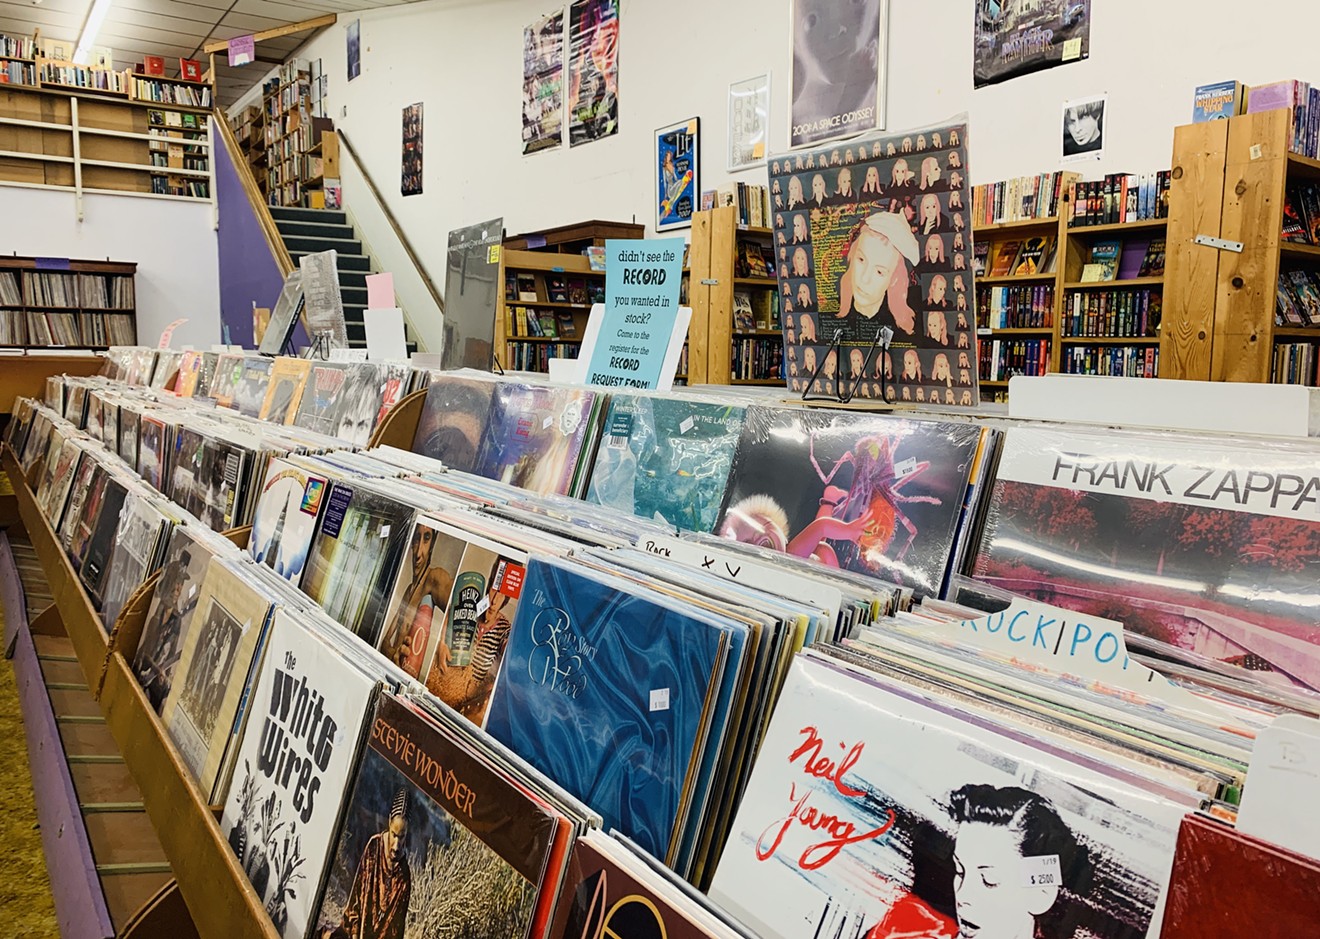 New and used vinyl records line the shelves at Recycled Books & Records in Denton.